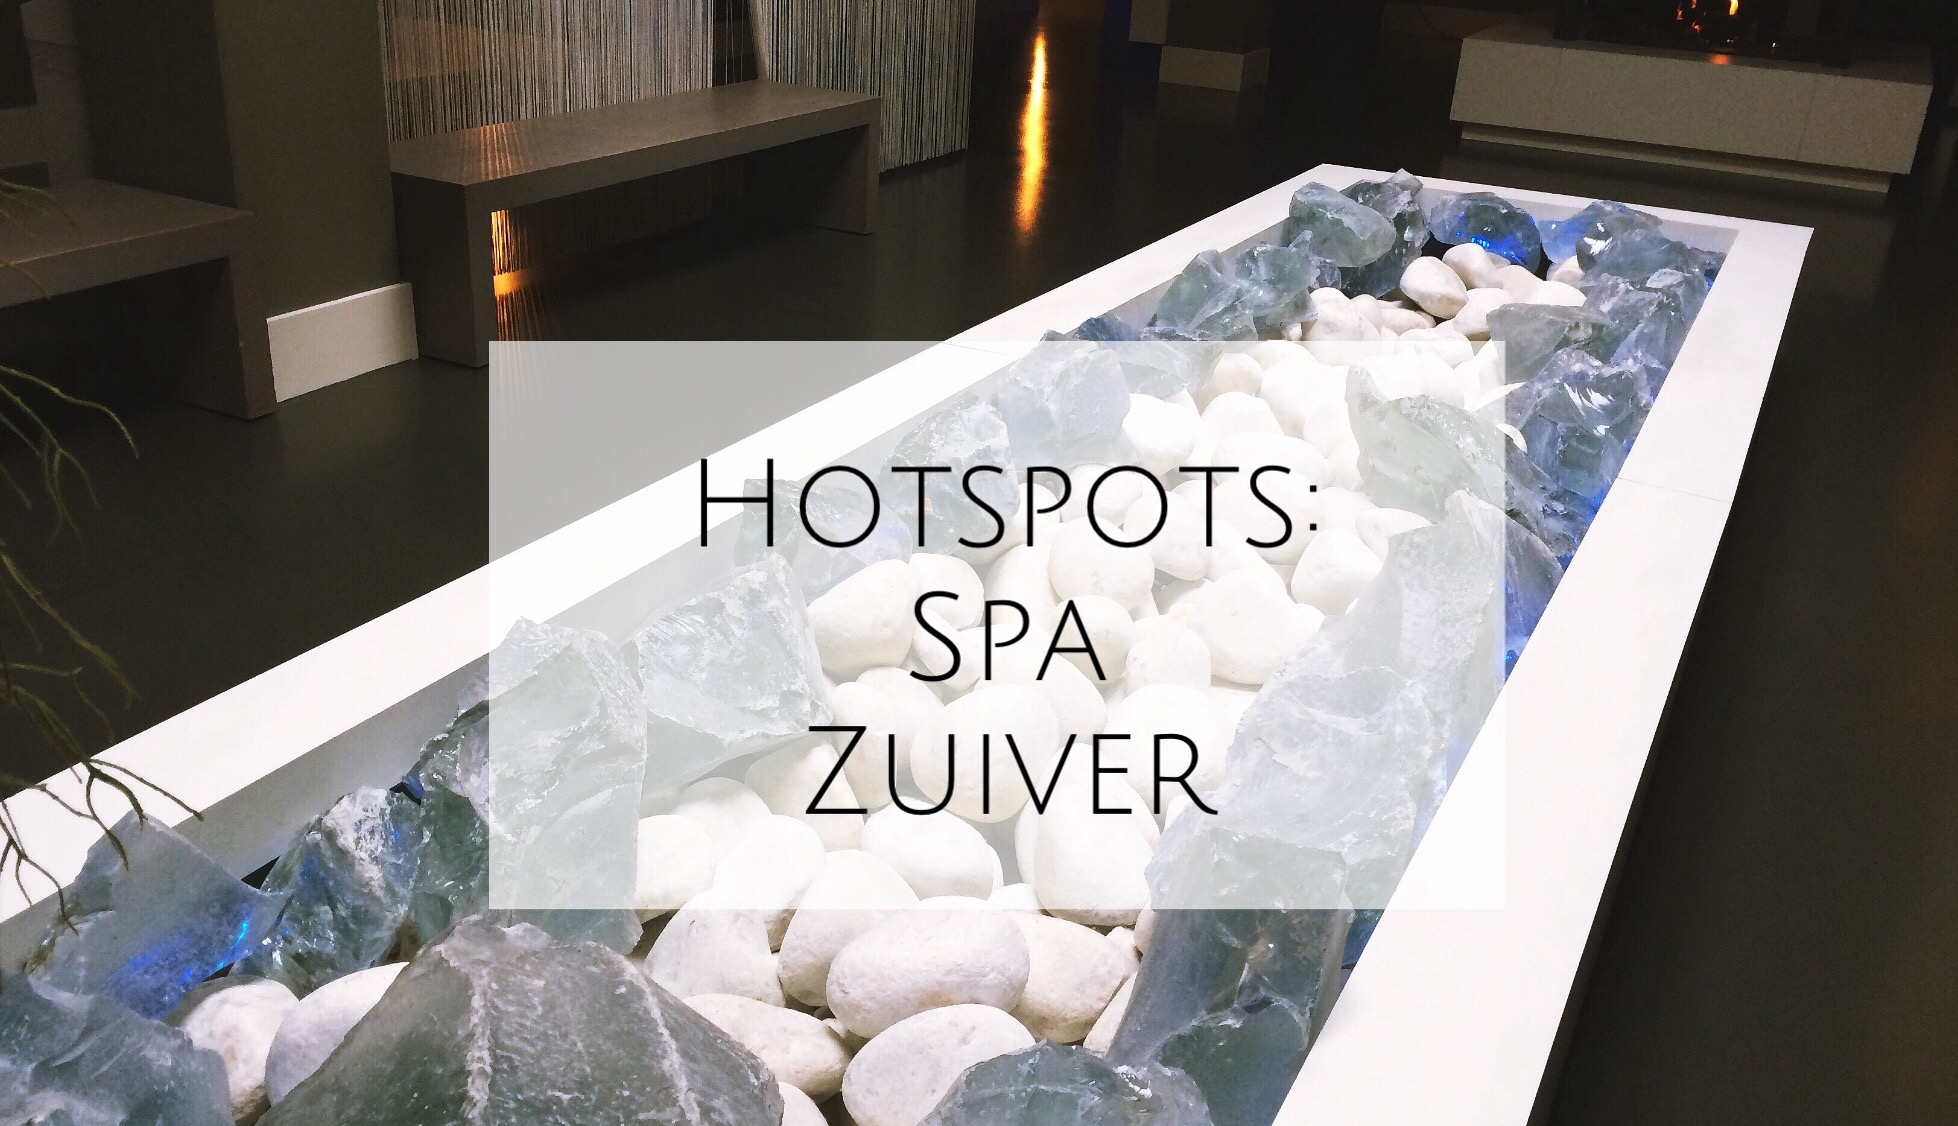 Hot spots: Spa Zuiver